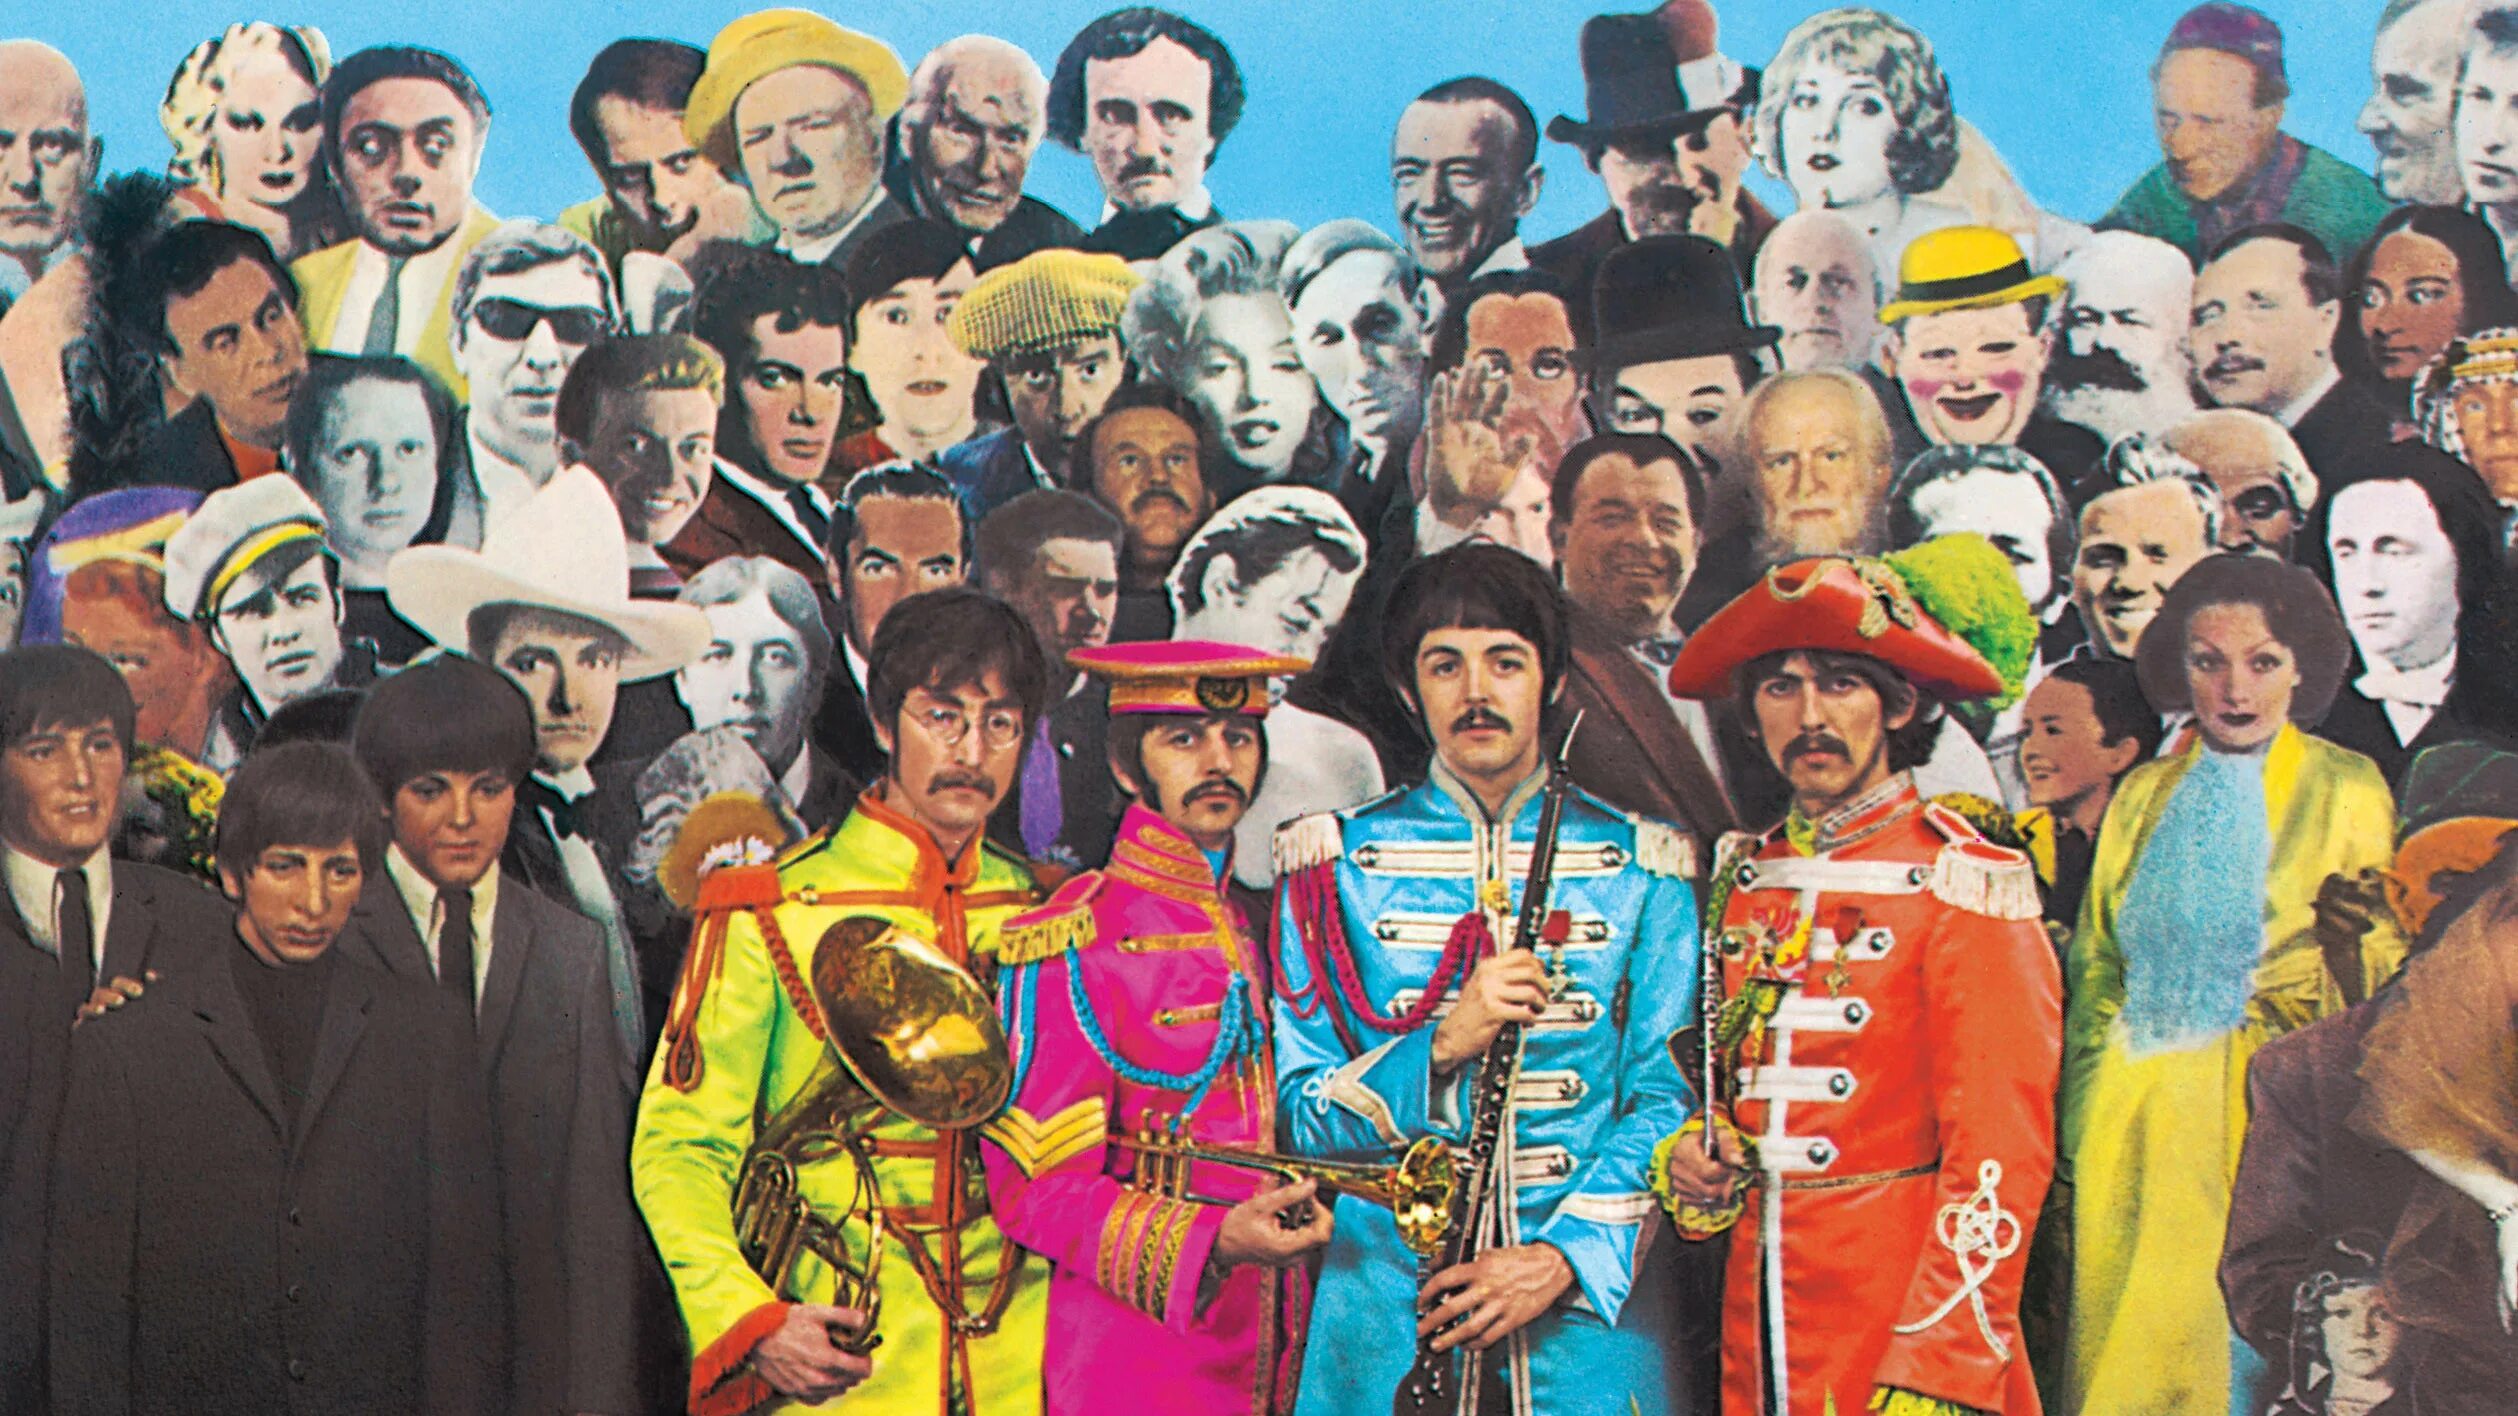 Beatles sgt peppers lonely hearts club. Sgt Pepper s Lonely Hearts Club Band. Sgt. Pepper’s Lonely Hearts Club Band the Beatles. Битлз сержант Пеппер. Битлз Sgt Pepper s Lonely Hearts Club Band.